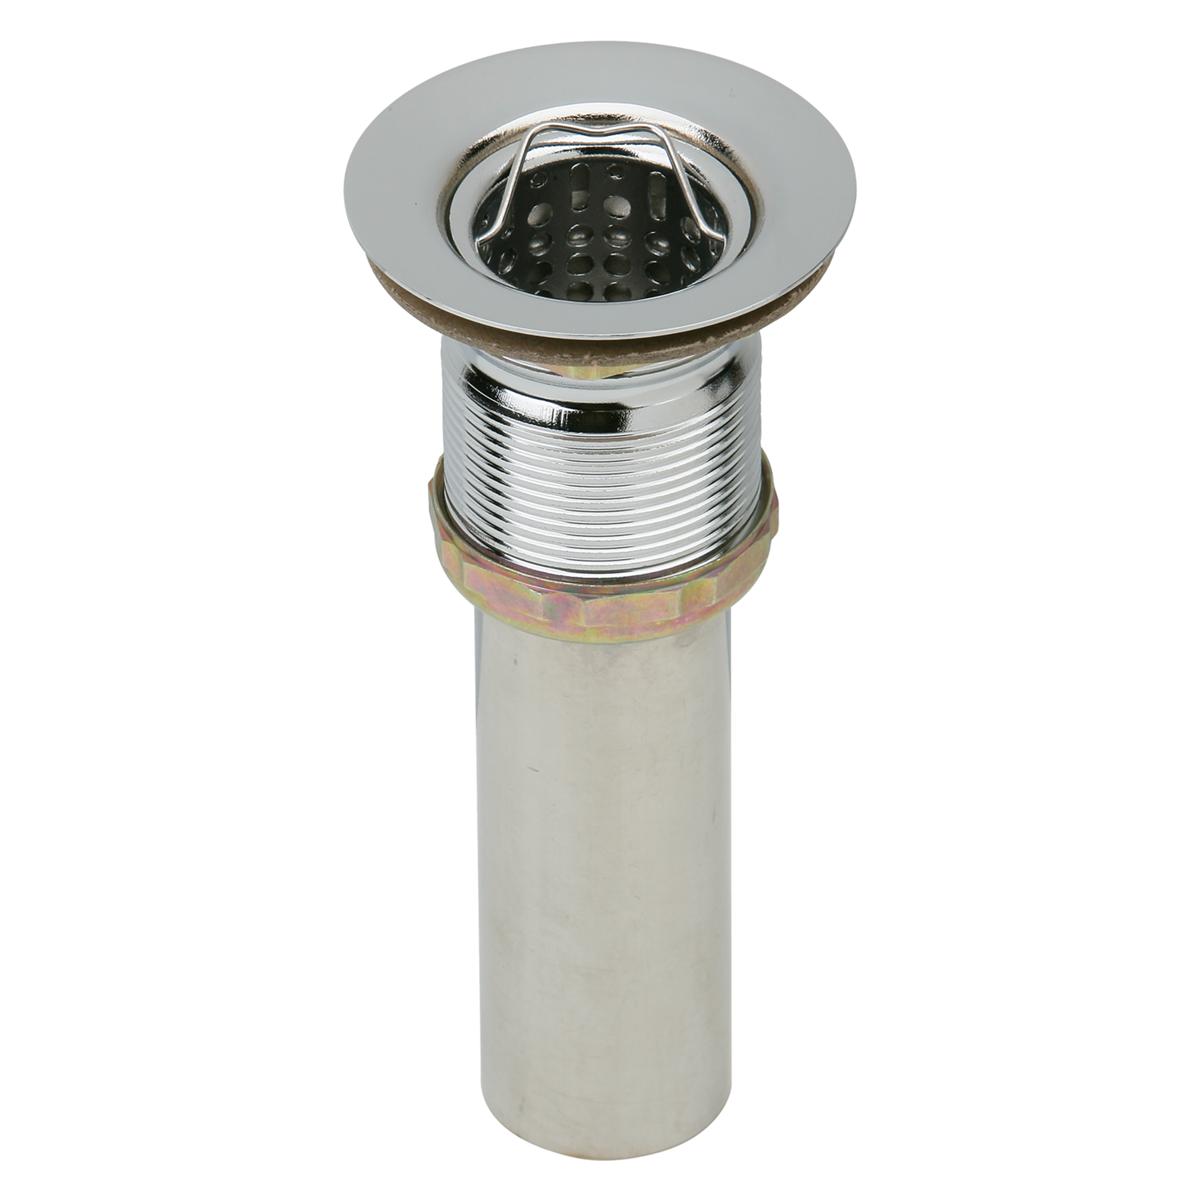 Elkay Drain Fitting 2" Nickel Plated Brass Body with Deep Stainless Steel Strainer Basket